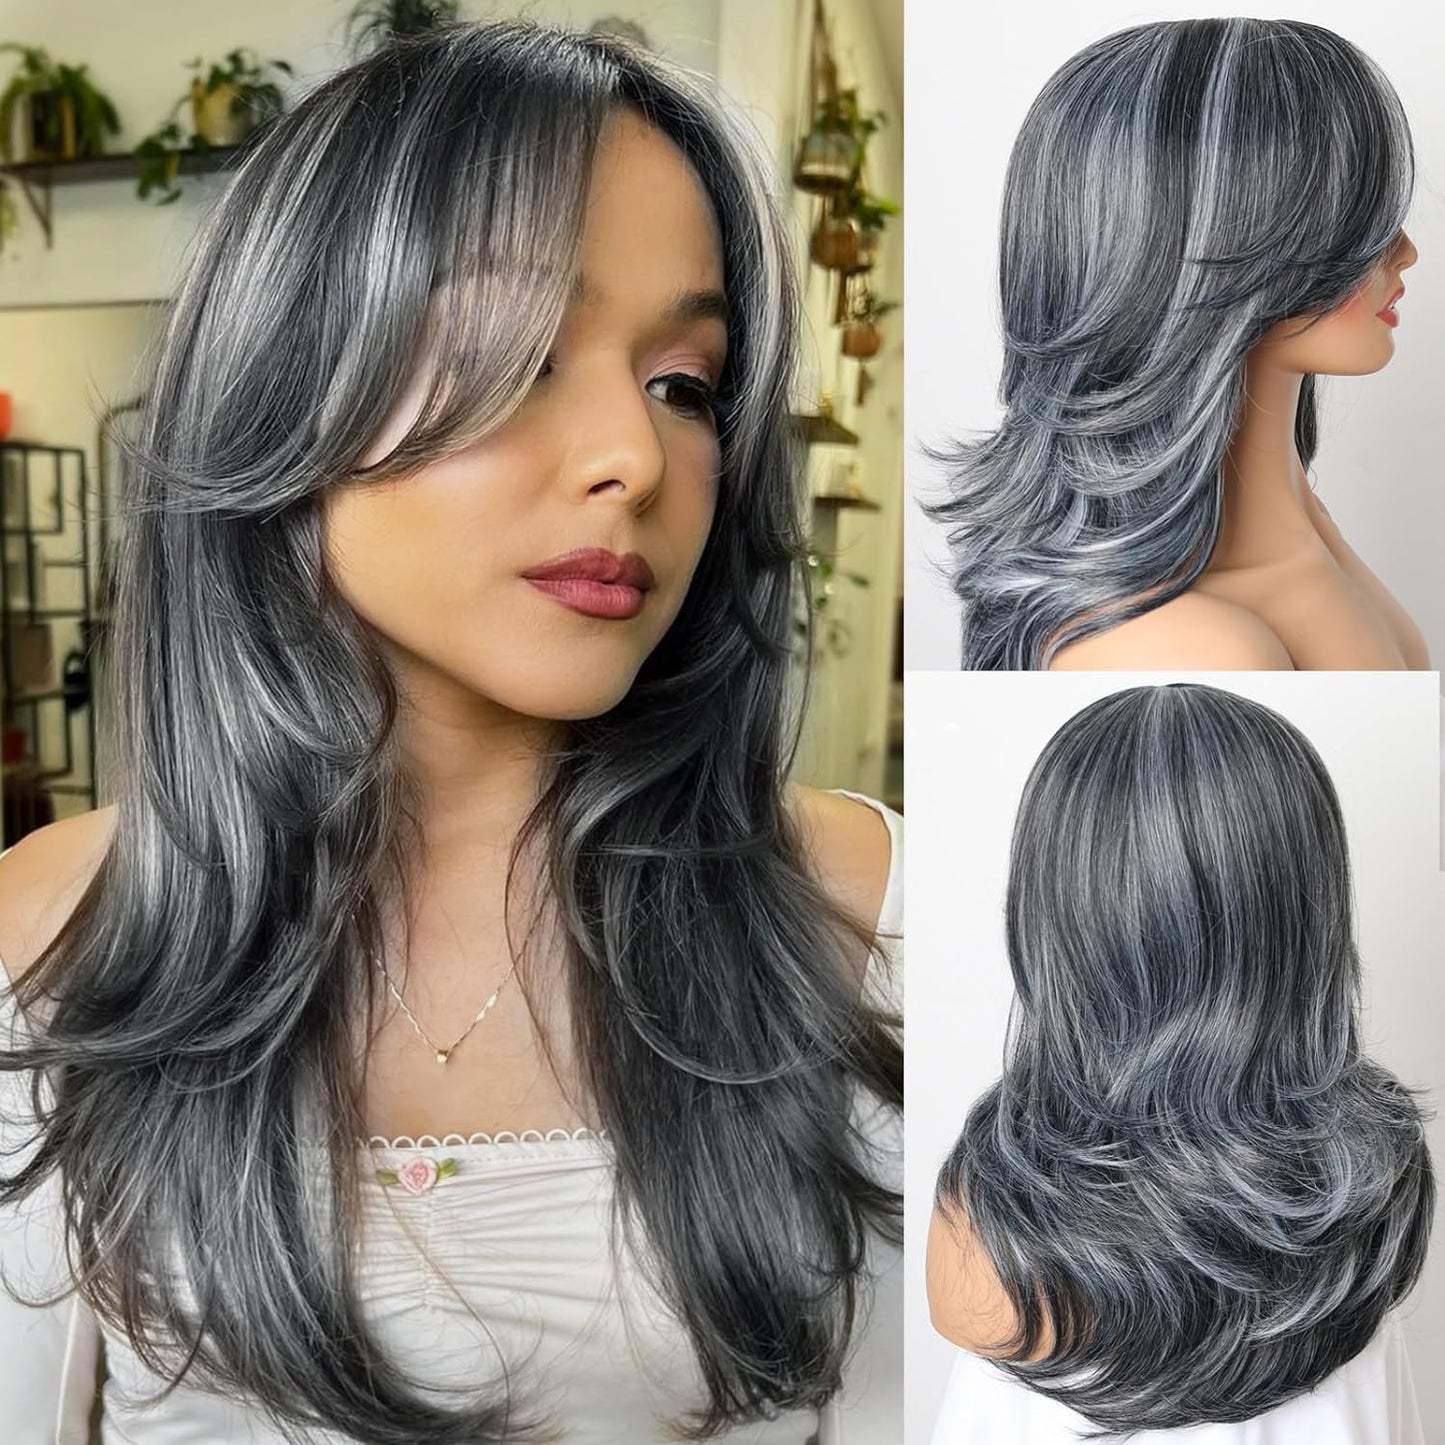 Gray Wigs for Women Silver Wig with Curtain Bangs Layered Wig Long Wavy Gray Ombre Wig Shoulder-Length Long Haired Wig Synthetic Light Grey Wig Natural Real Hair Wig for Daily Party Use